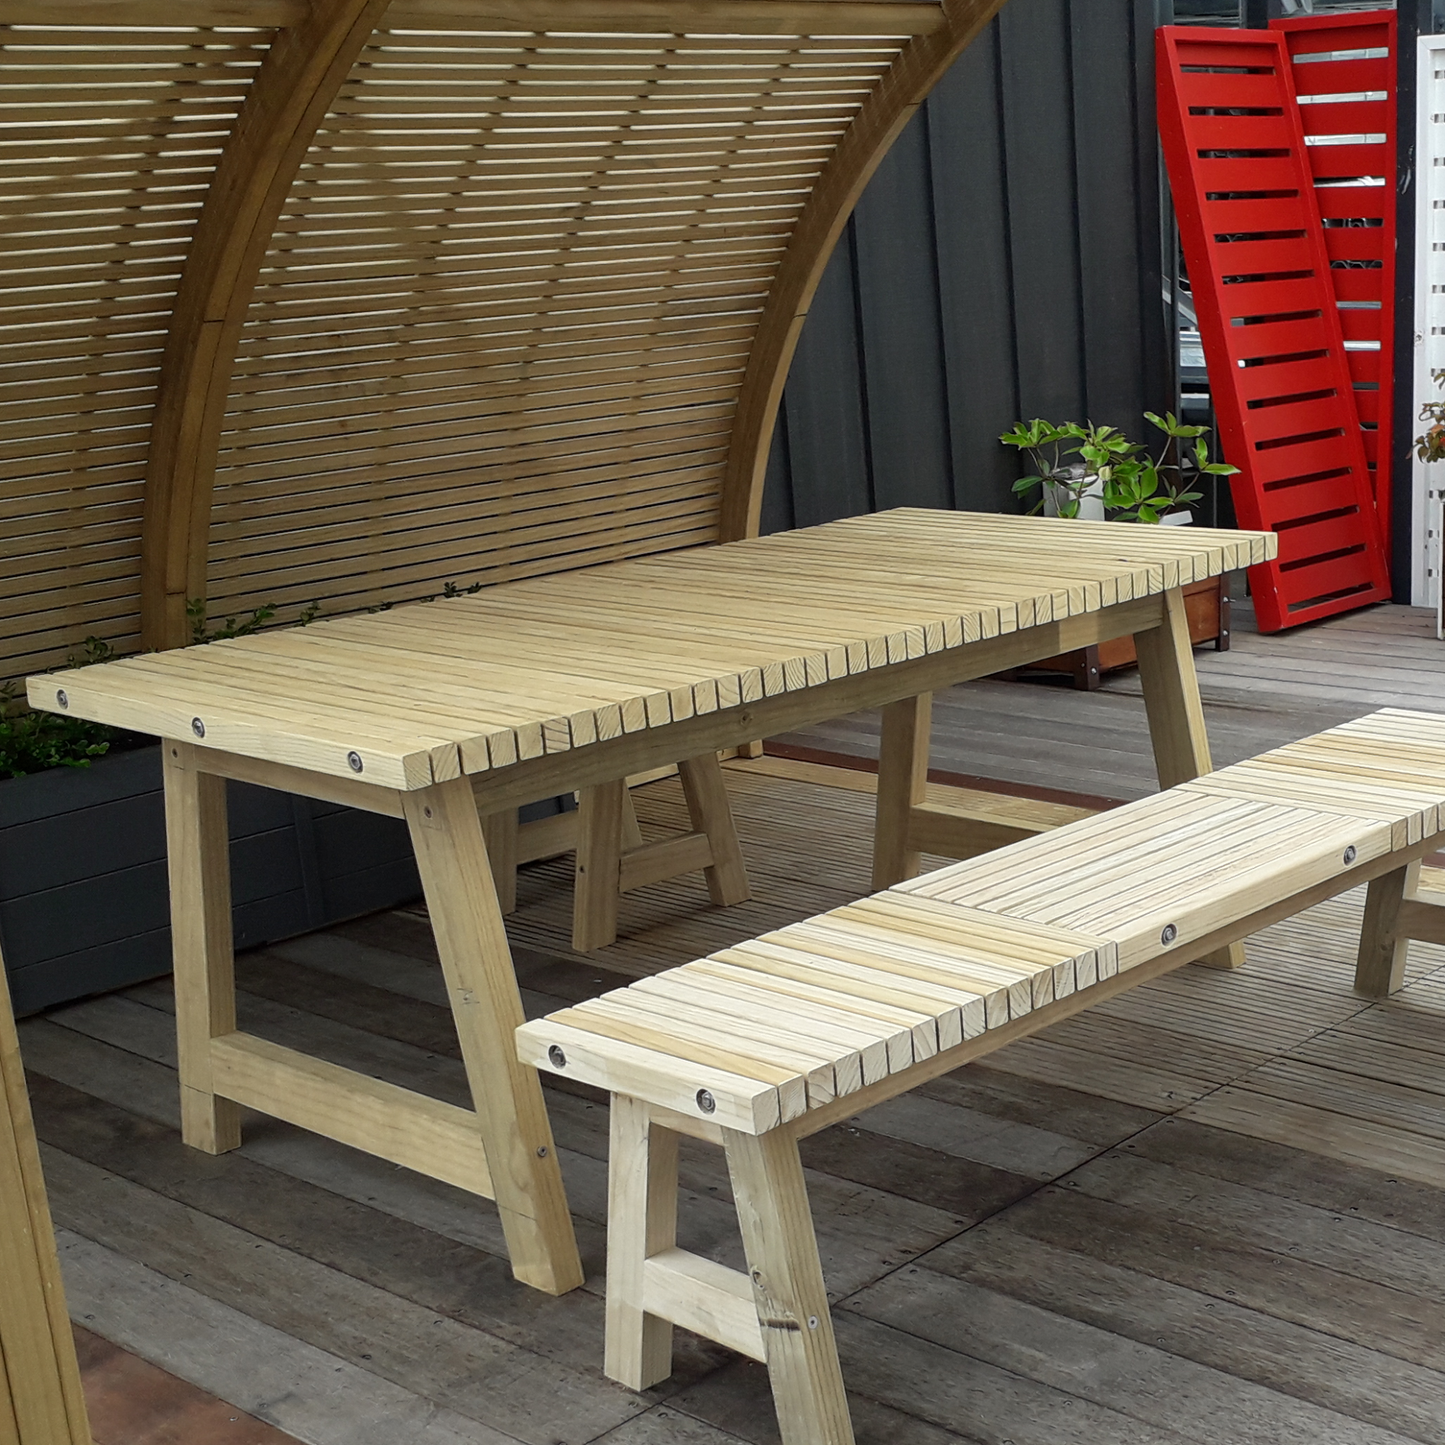 DIY plans for a modular batten-top table and seats